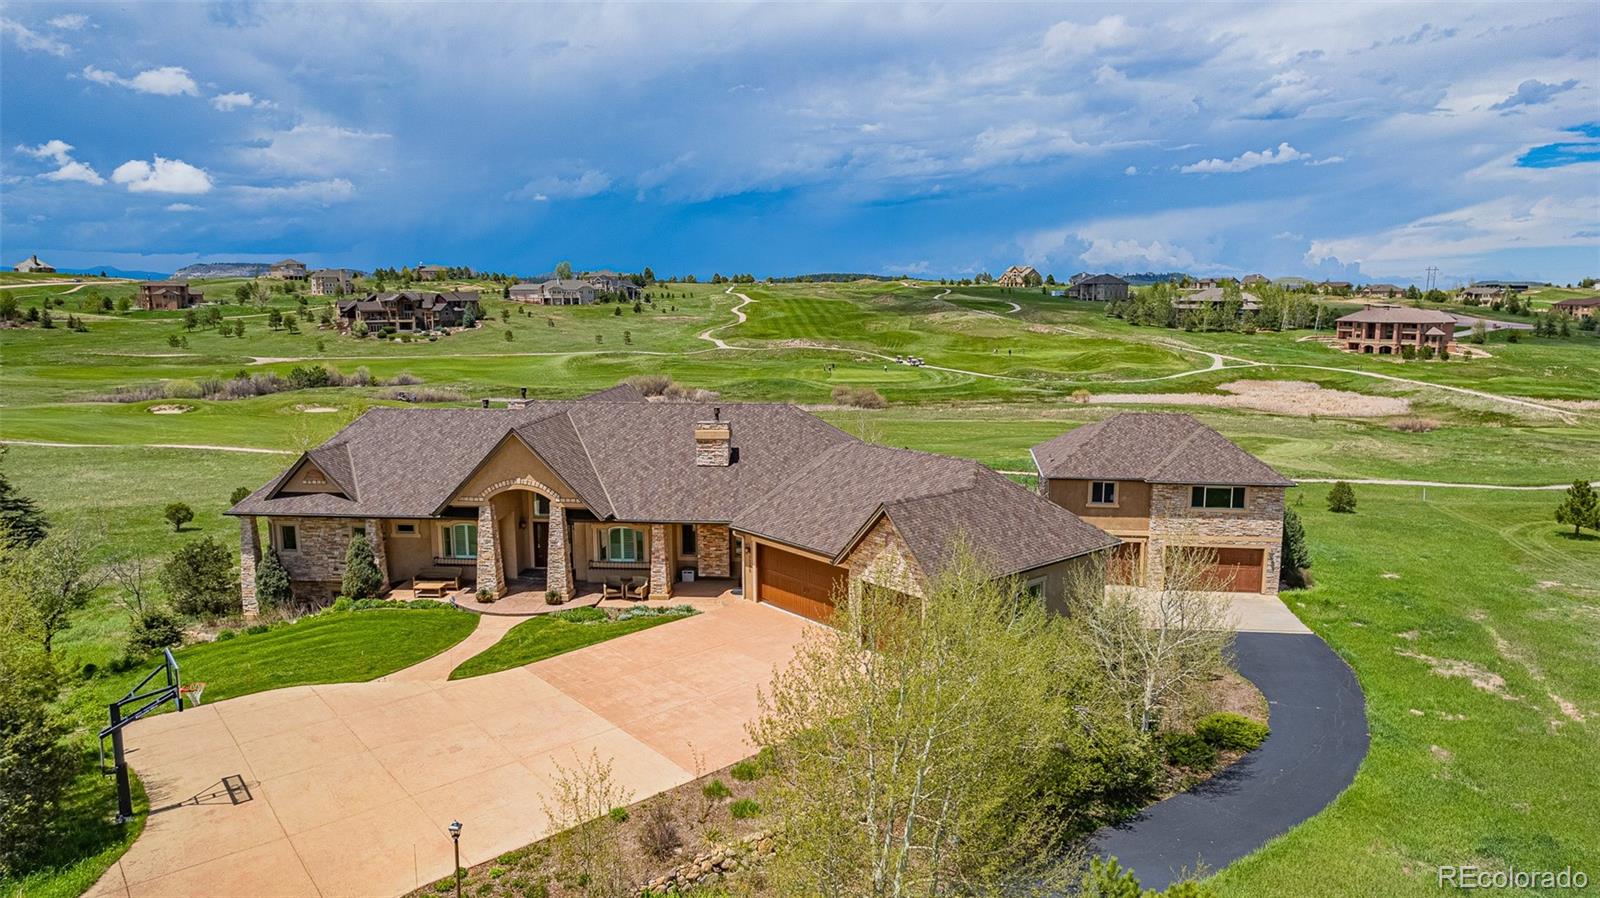 Report Image for 1290  Castlecombe Lane,Monument, Colorado